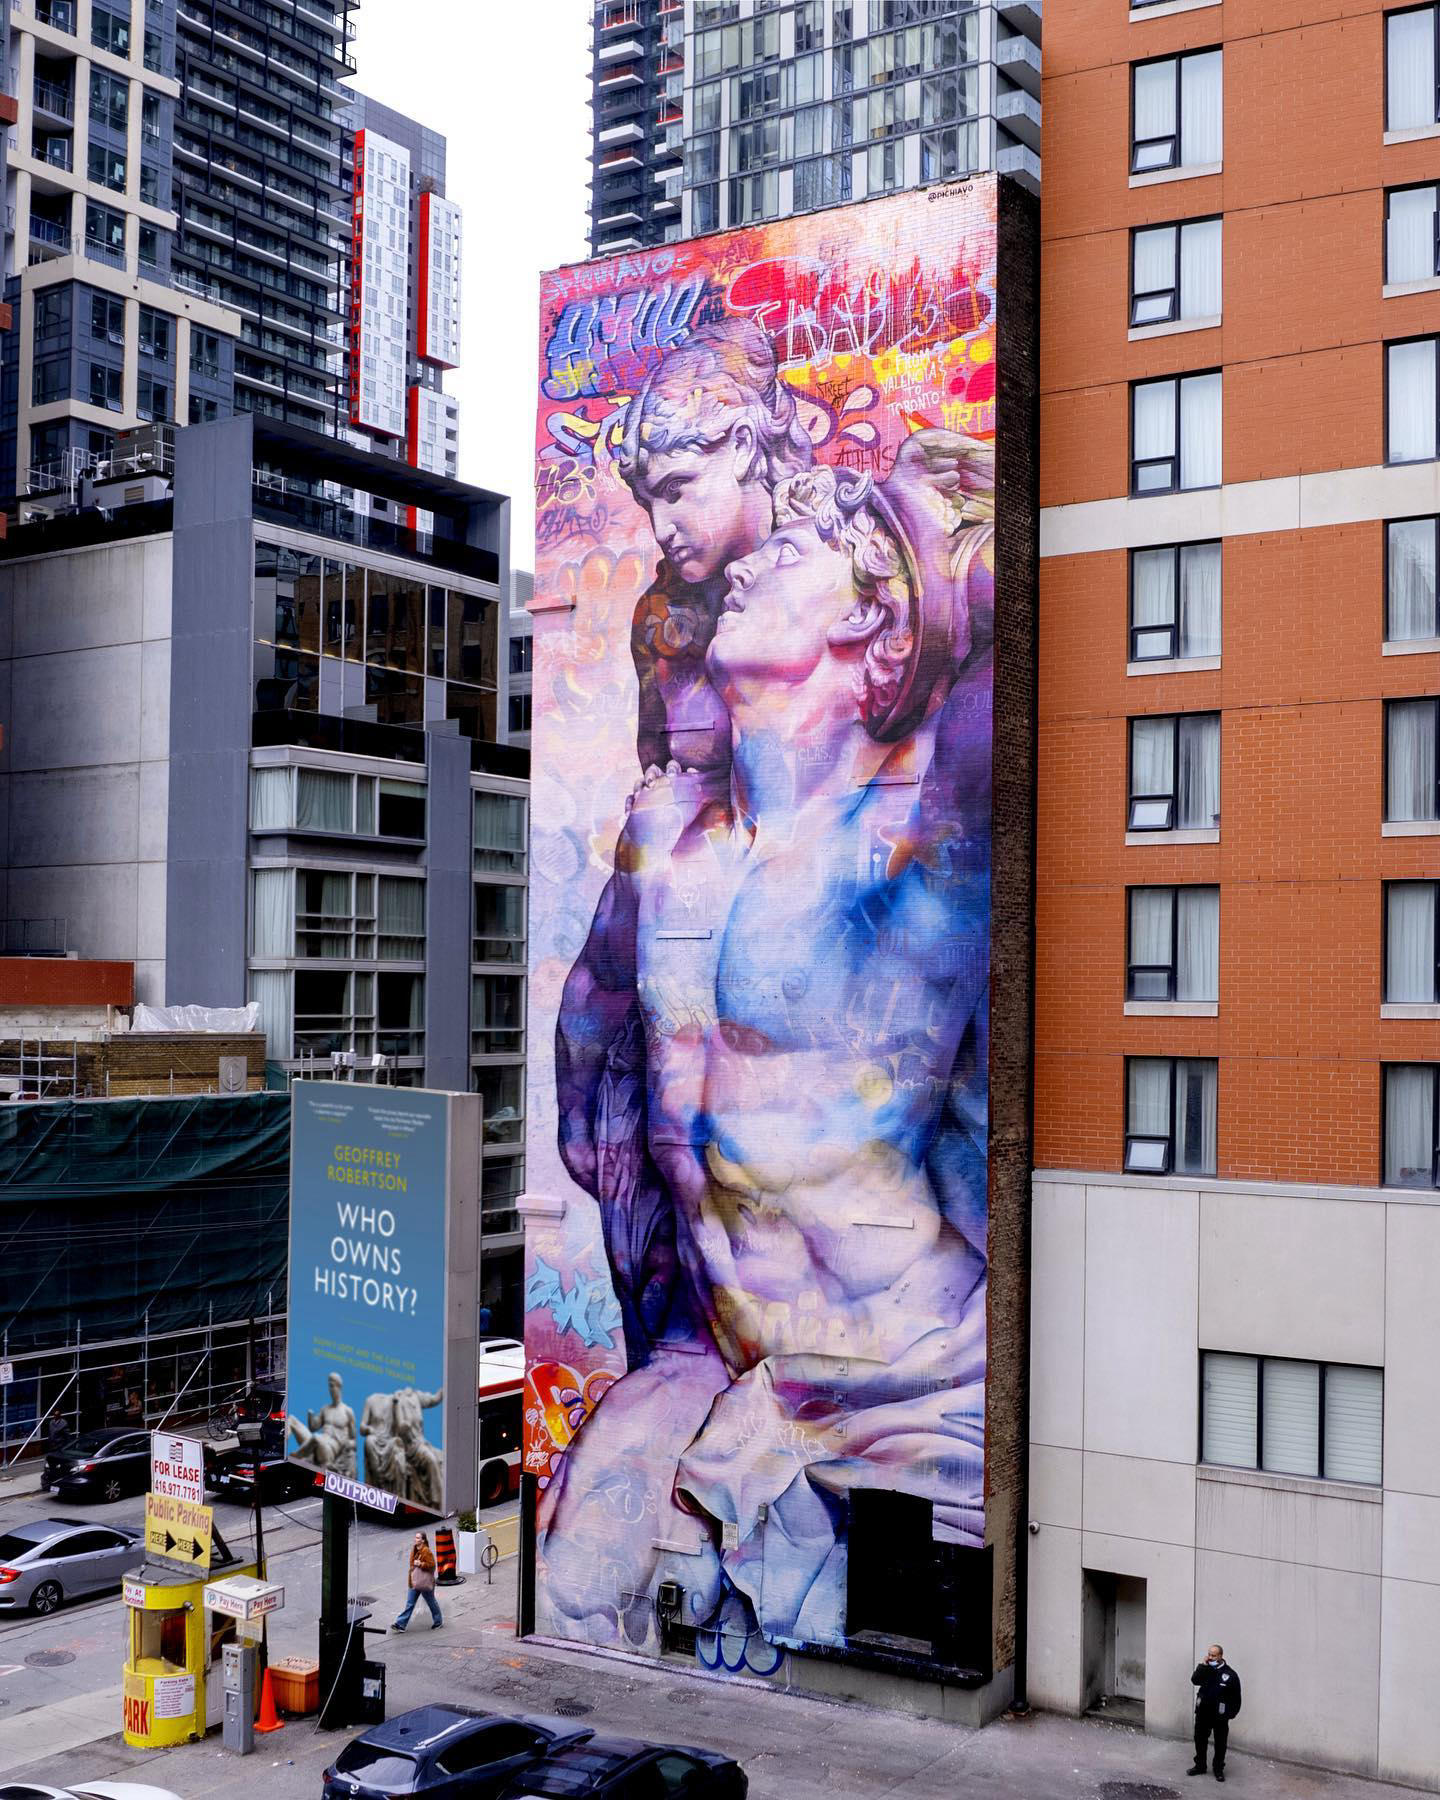 image  1 PichiAvo - For our first mural in Toronto 🇨🇦, we selected the sculpture Mercury and Psyche” made